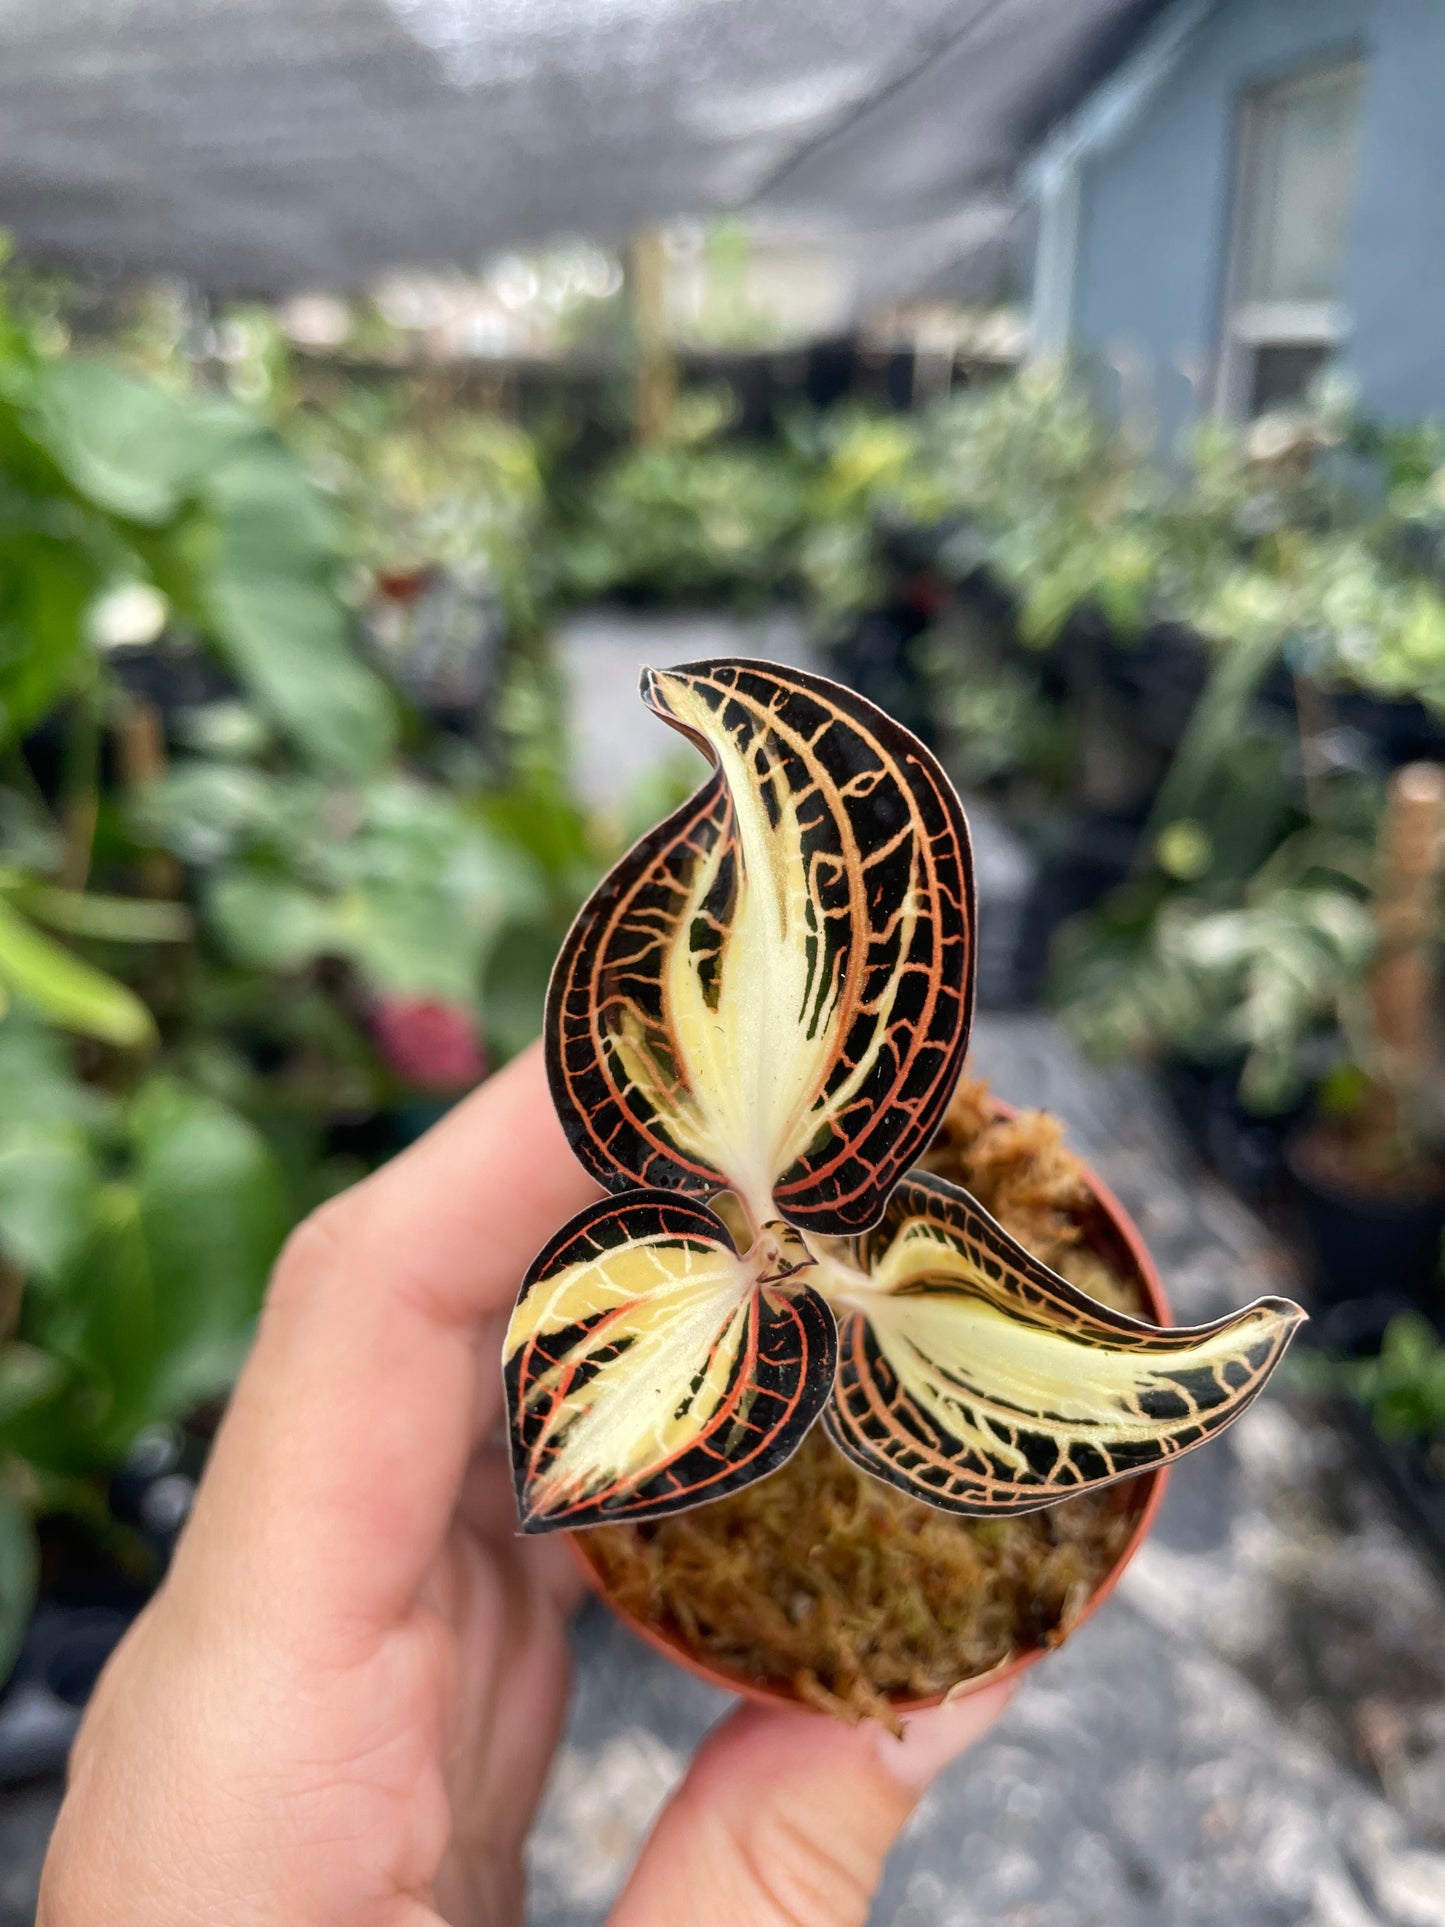 Jewel orchid variegated